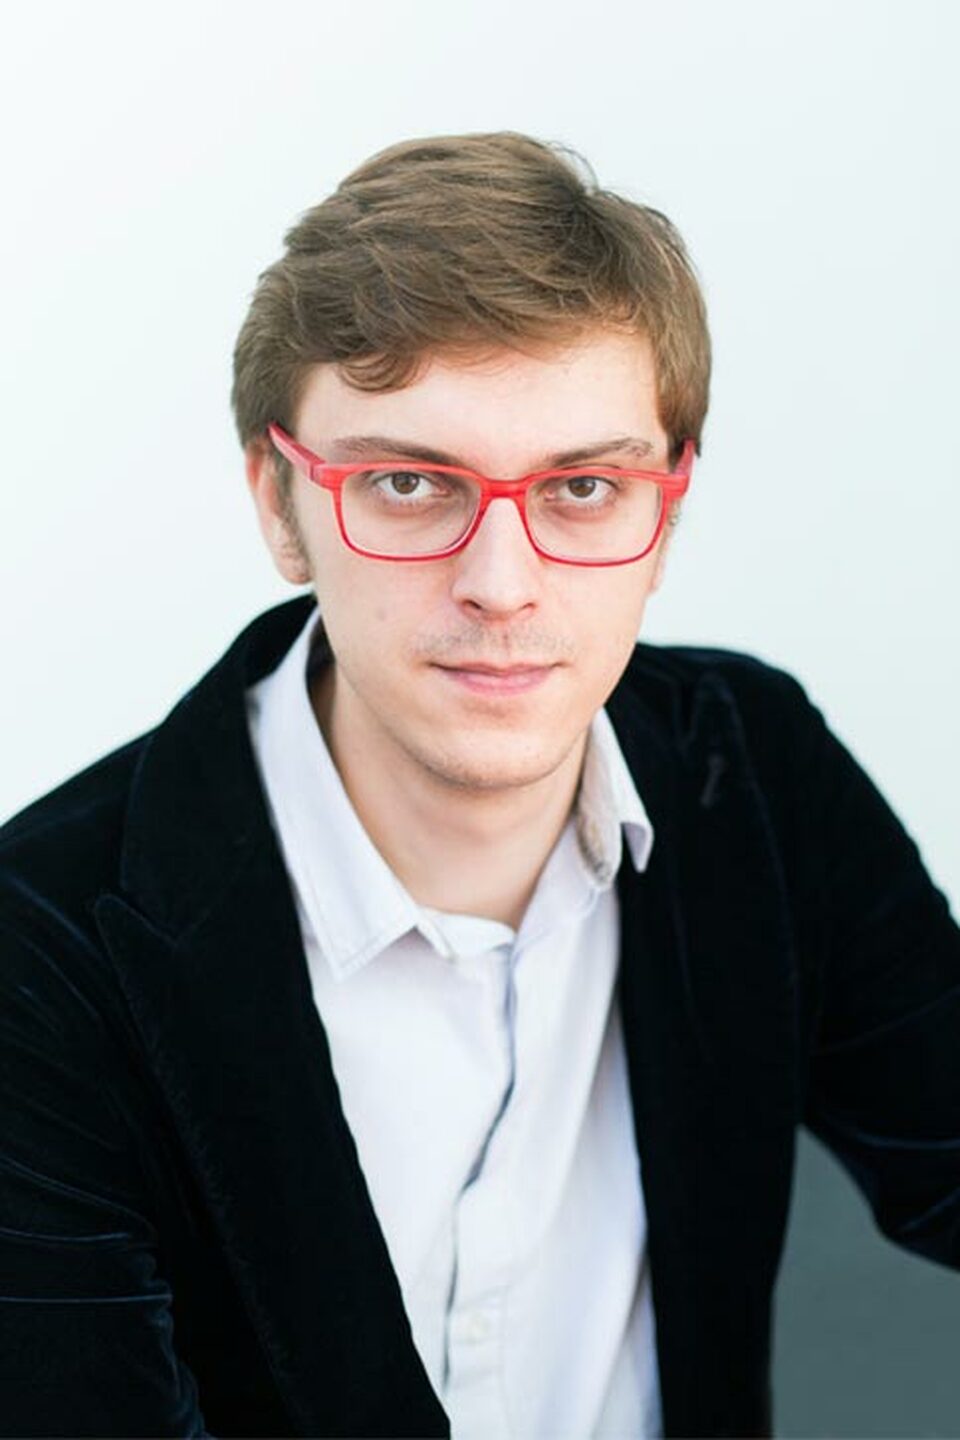 Managing director of Bookmate, Andrew Baev. (Photo courtesy of Bookmate)